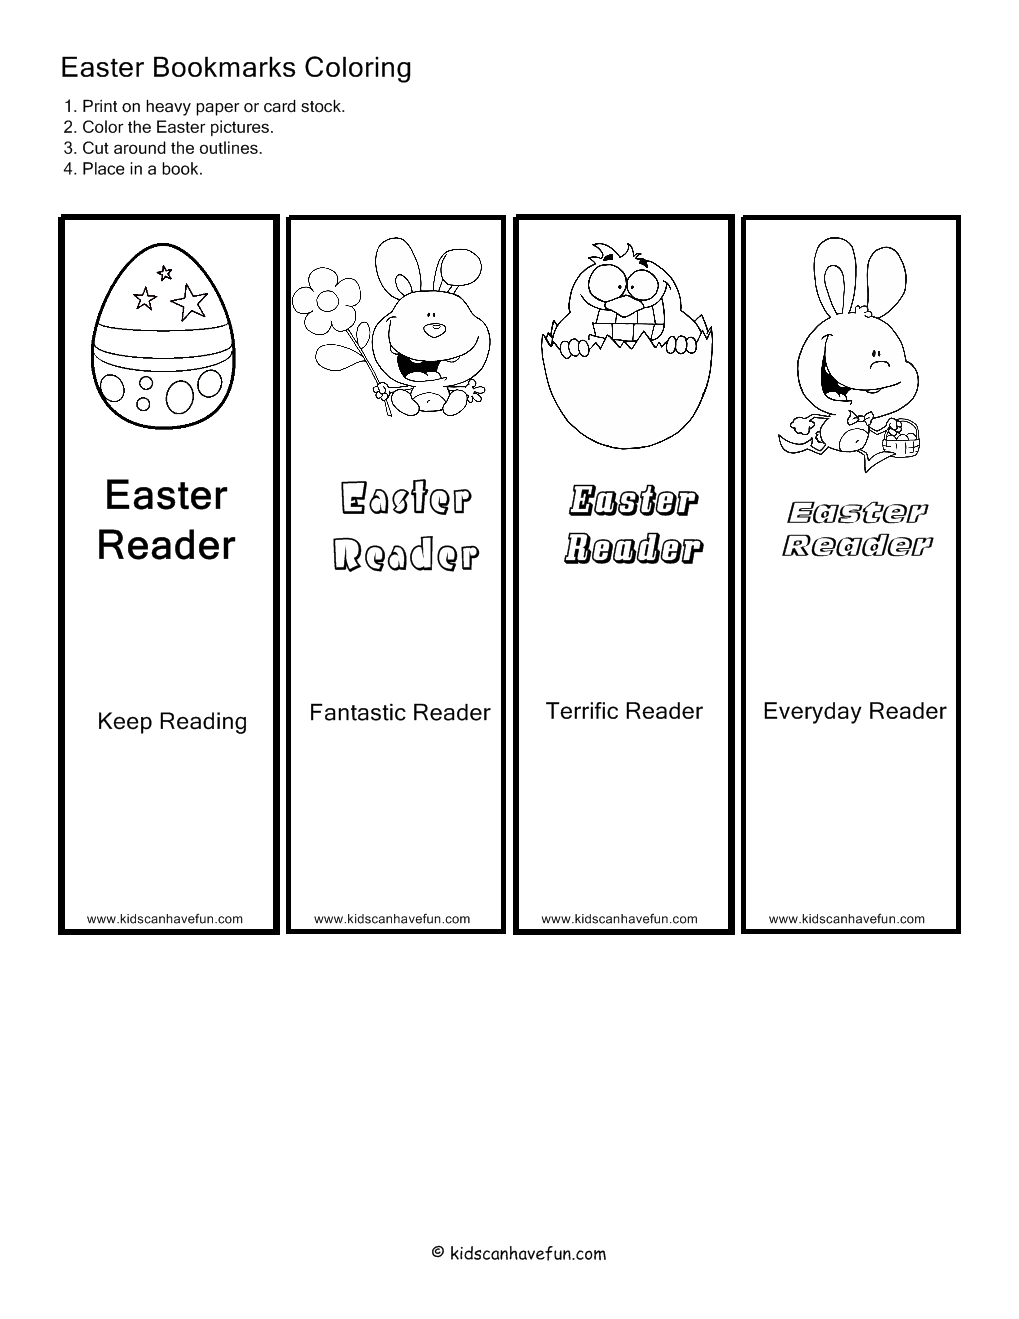 Printable Easter Bookmarks – Happy Easter &amp;amp; Thanksgiving 2018 - Free Printable Religious Easter Bookmarks